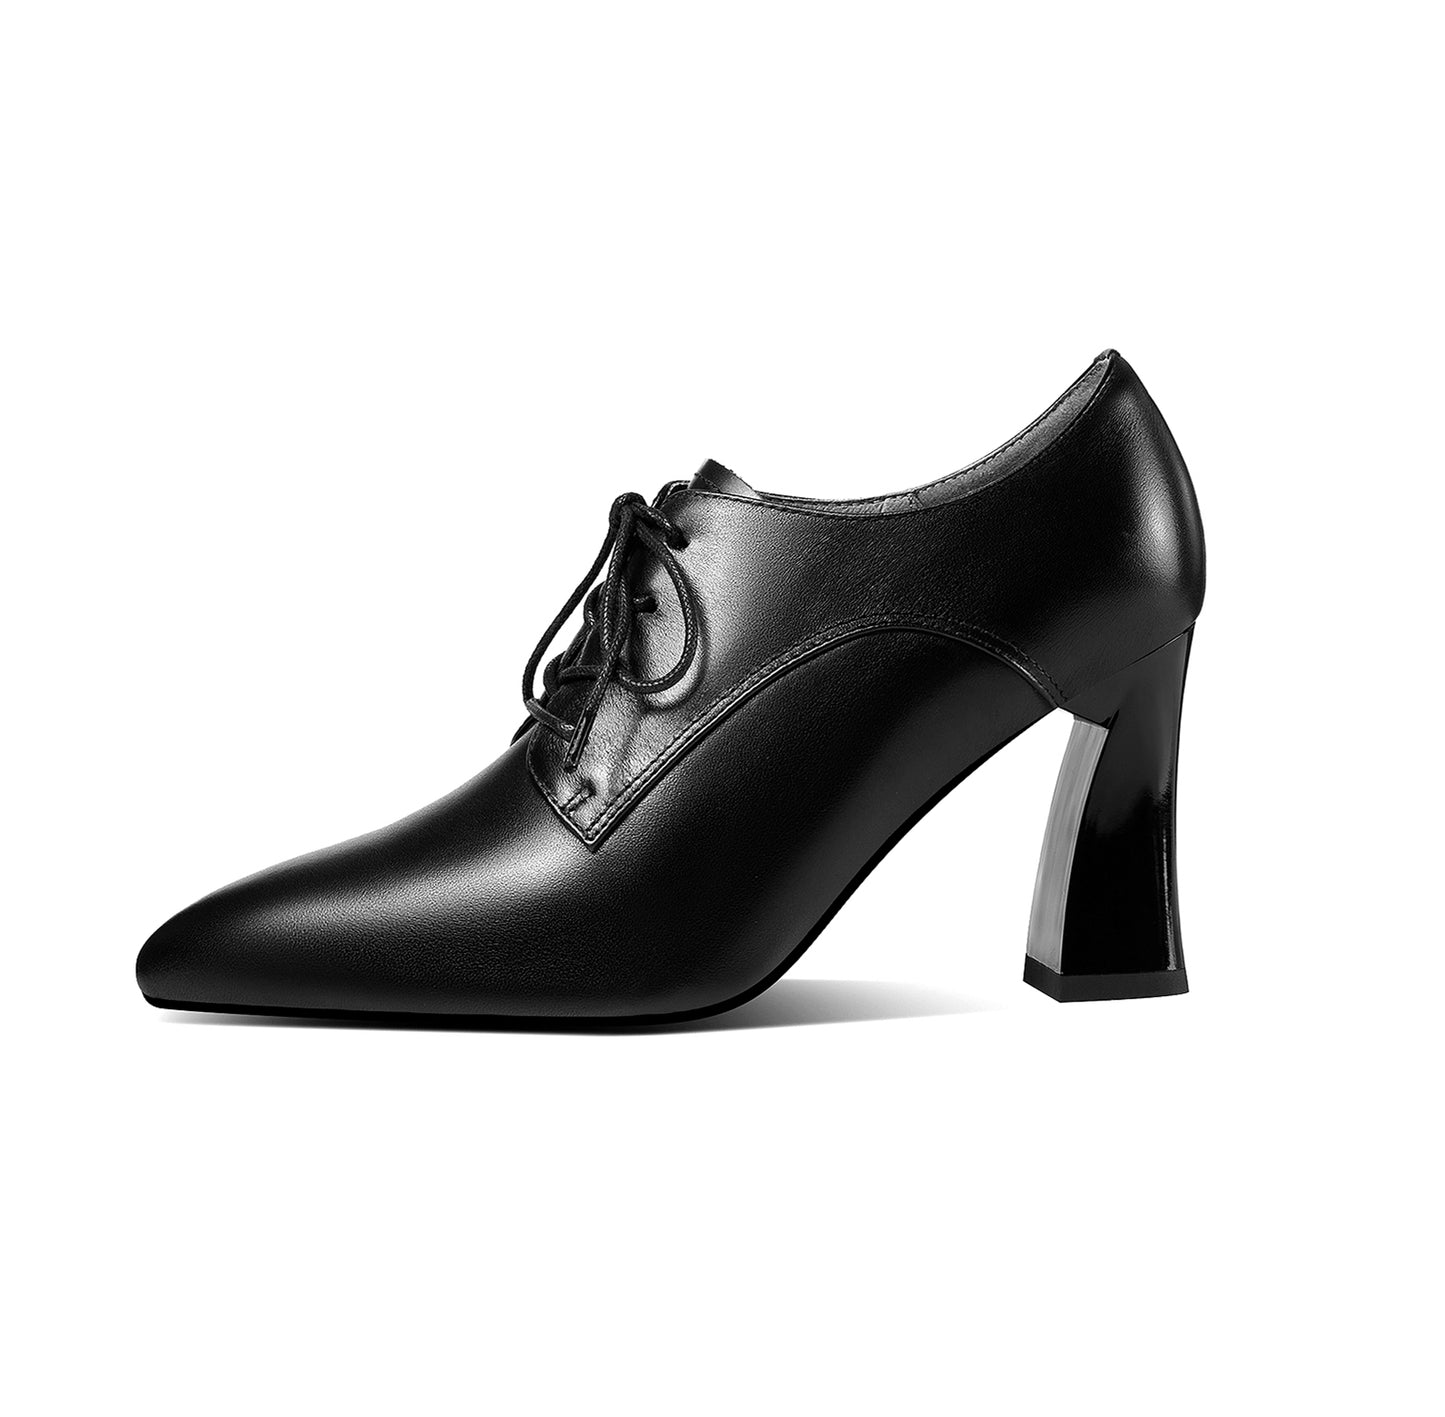 TinaCus Women's Genuine Leather Handmade Pointed Toe High Chunky Heel Lace Up Stylish Oxford Pumps